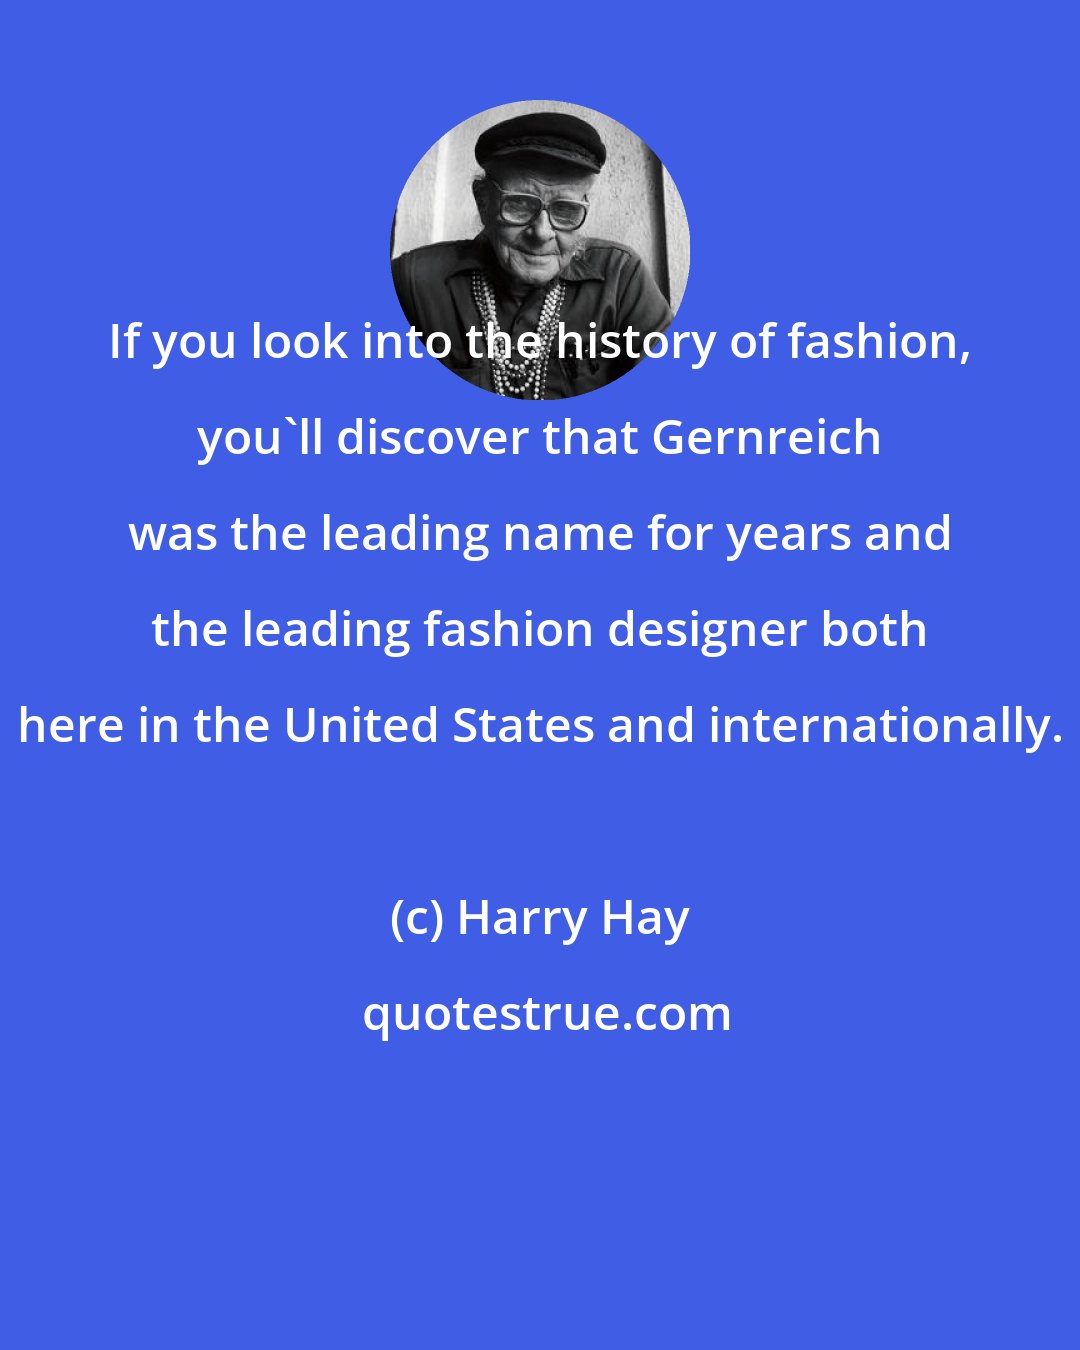 Harry Hay: If you look into the history of fashion, you'll discover that Gernreich was the leading name for years and the leading fashion designer both here in the United States and internationally.